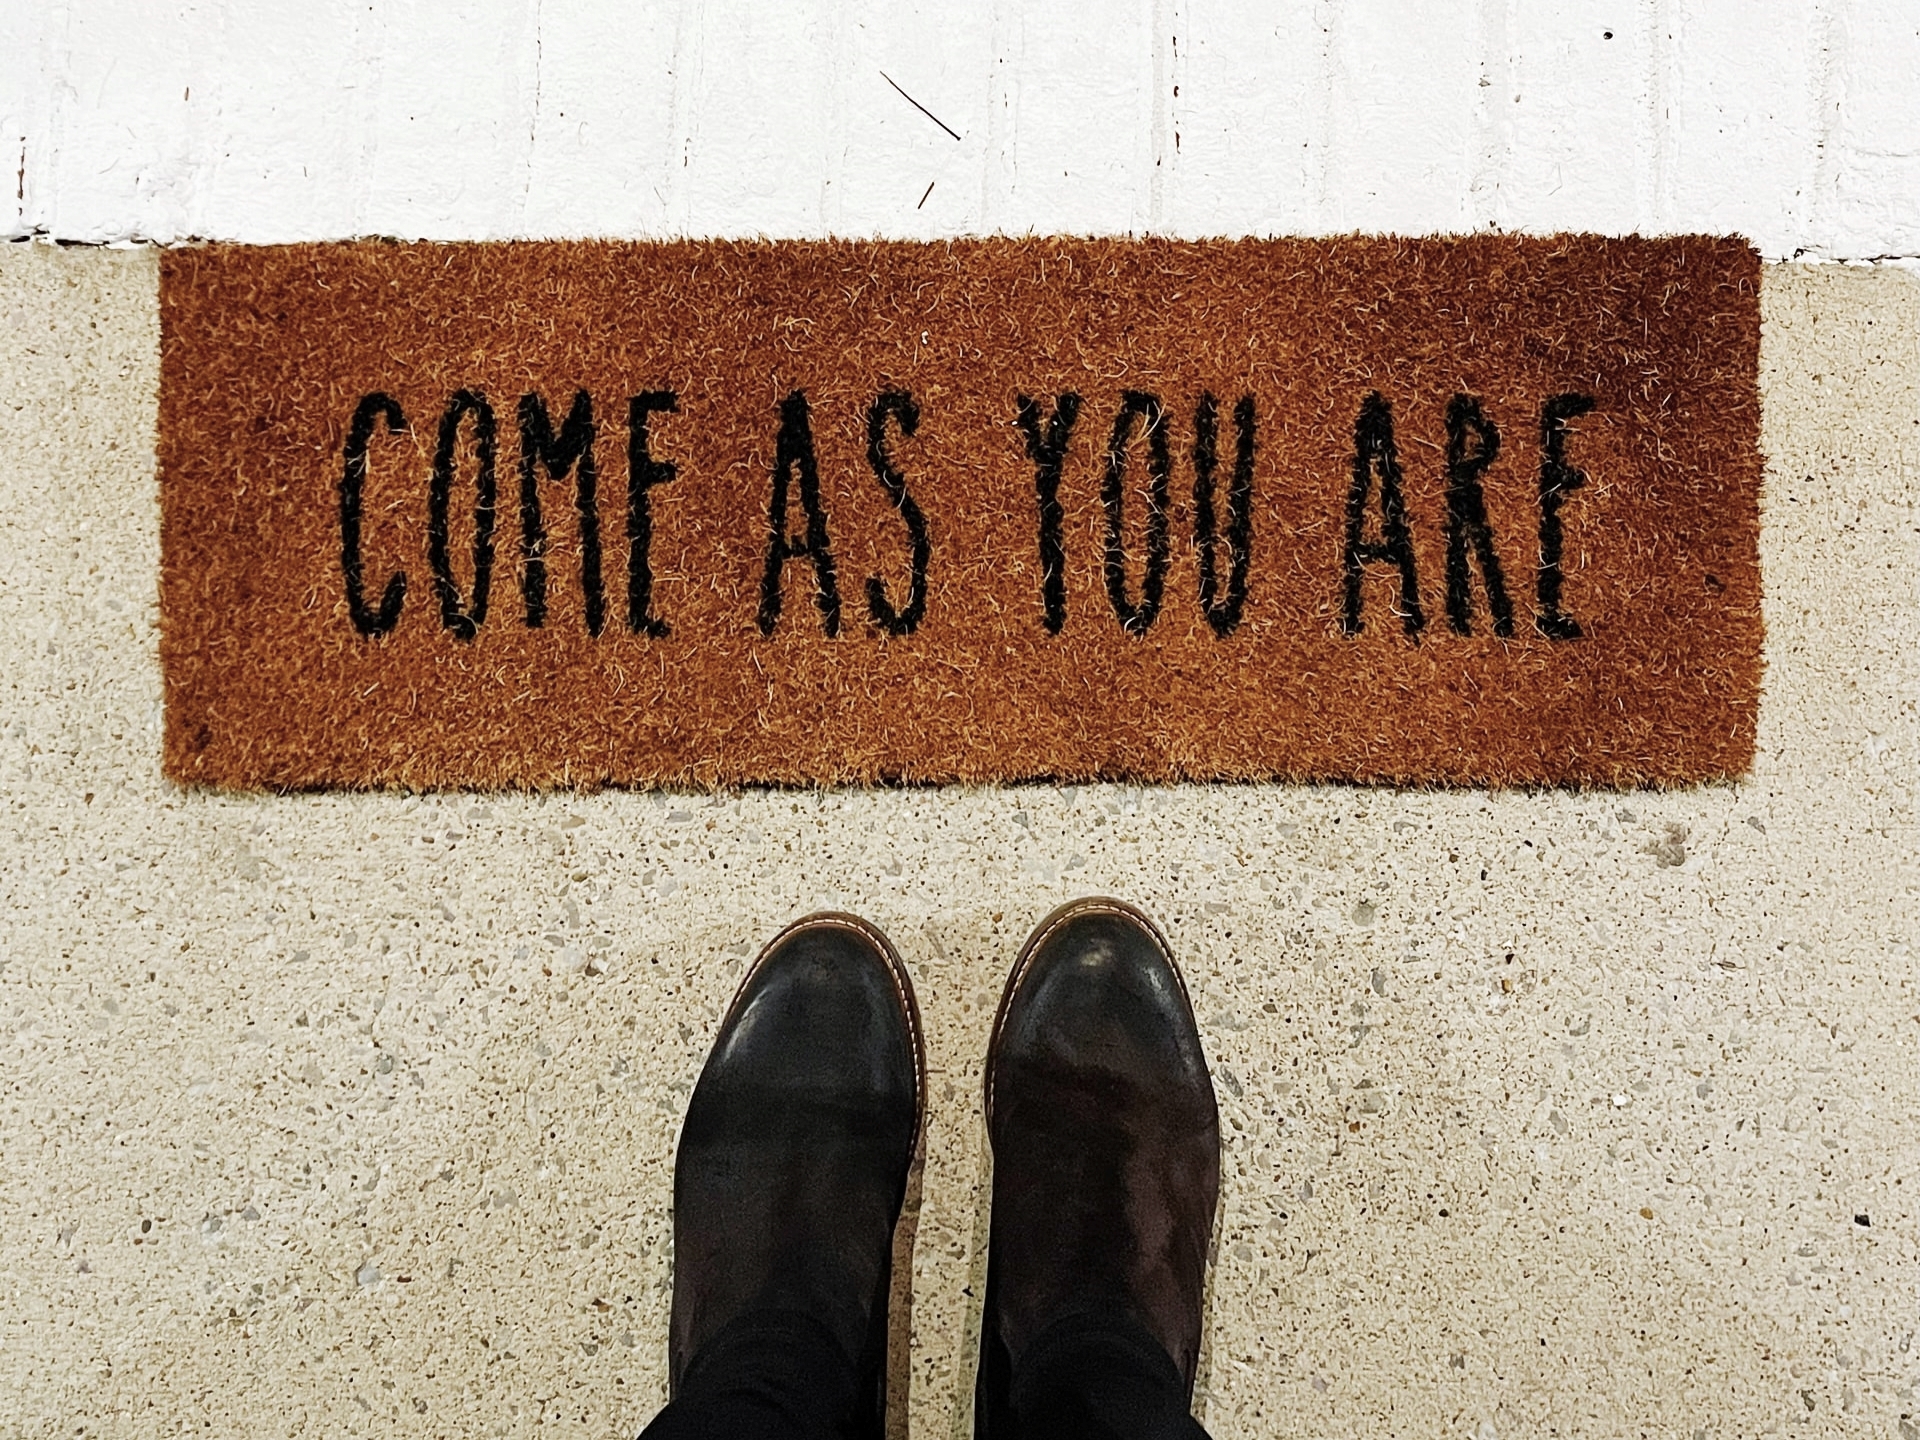 Being authentic 'come as you are', photo by Jon Tyson on Unsplash